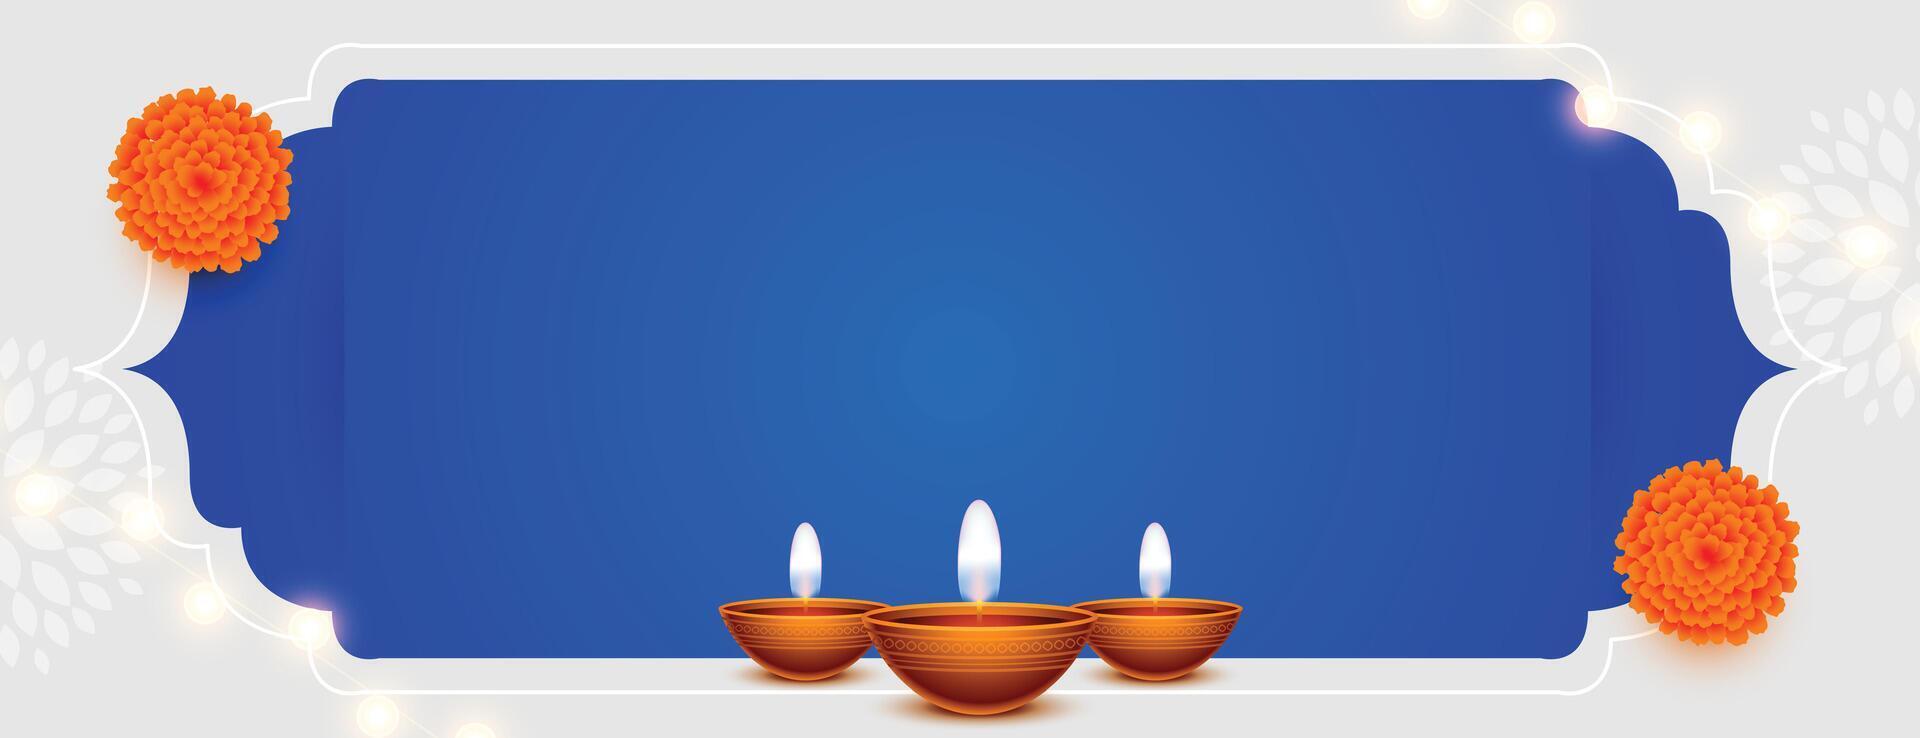 happy diwali greeting banner with text space and diya decoration vector